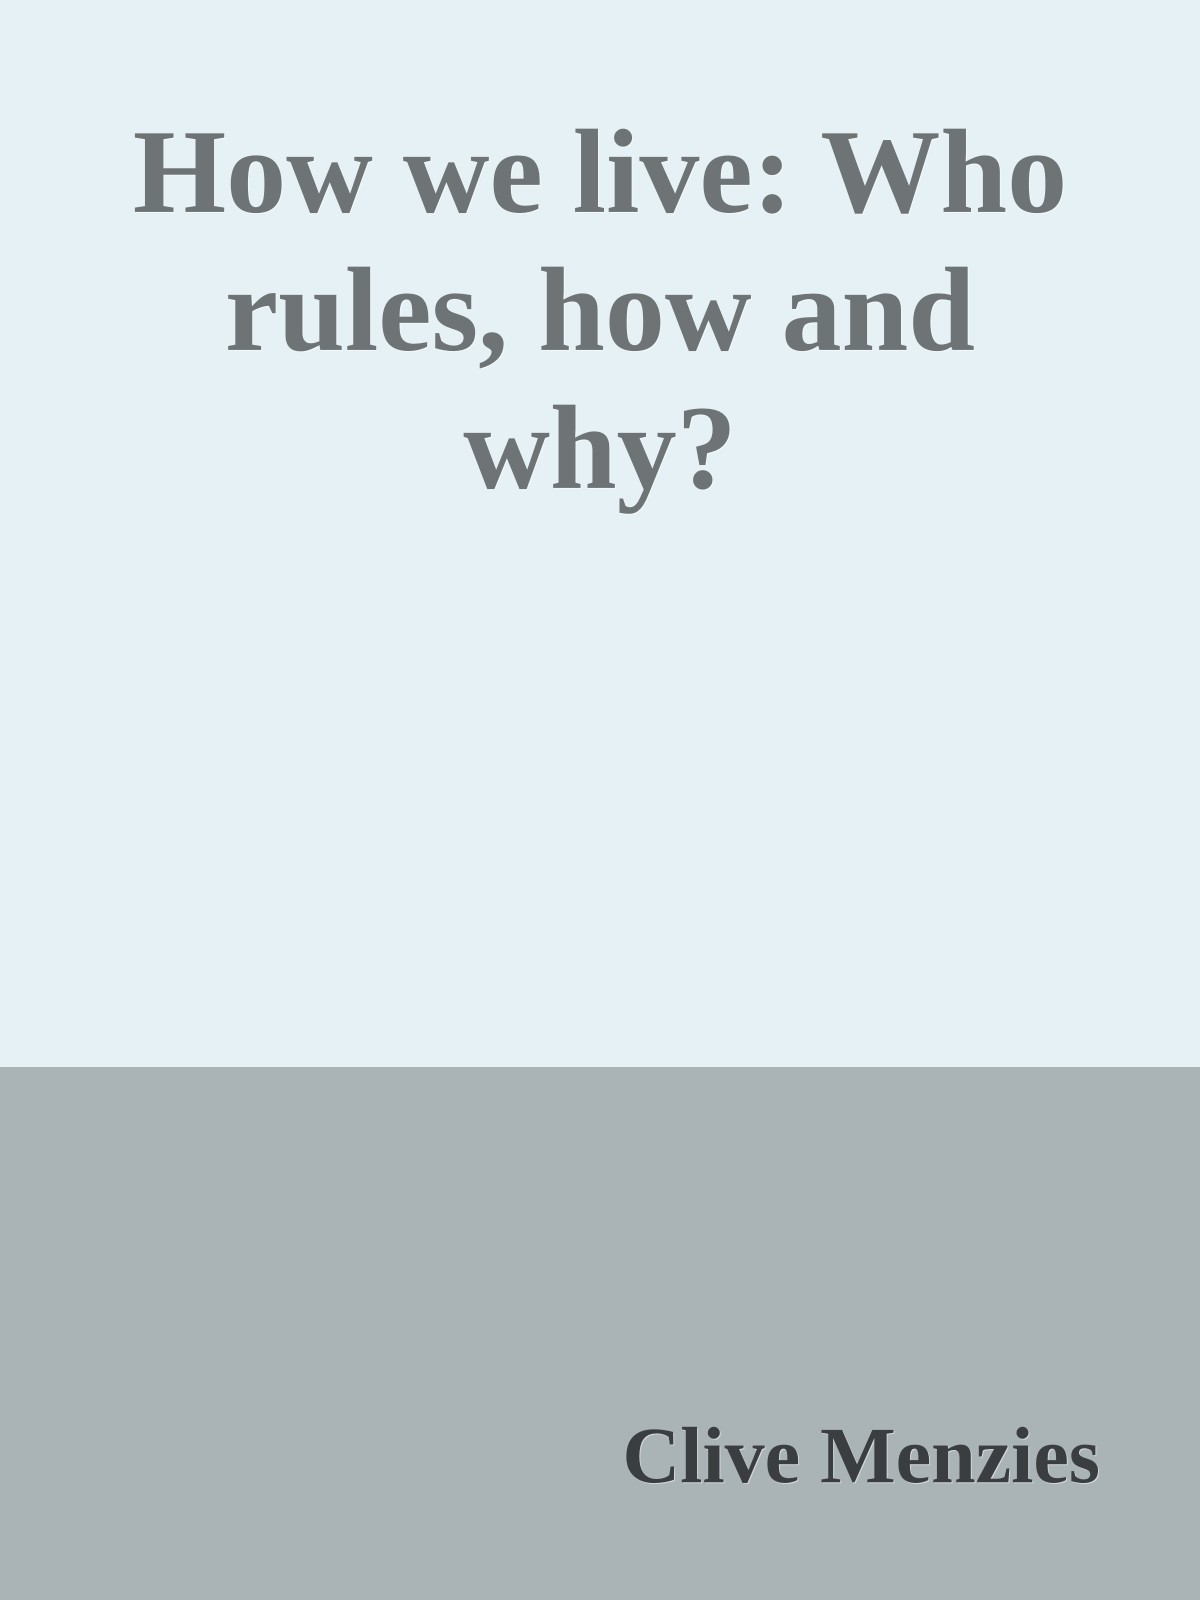 How we live: Who rules, how and why? (2019) by Clive Menzies